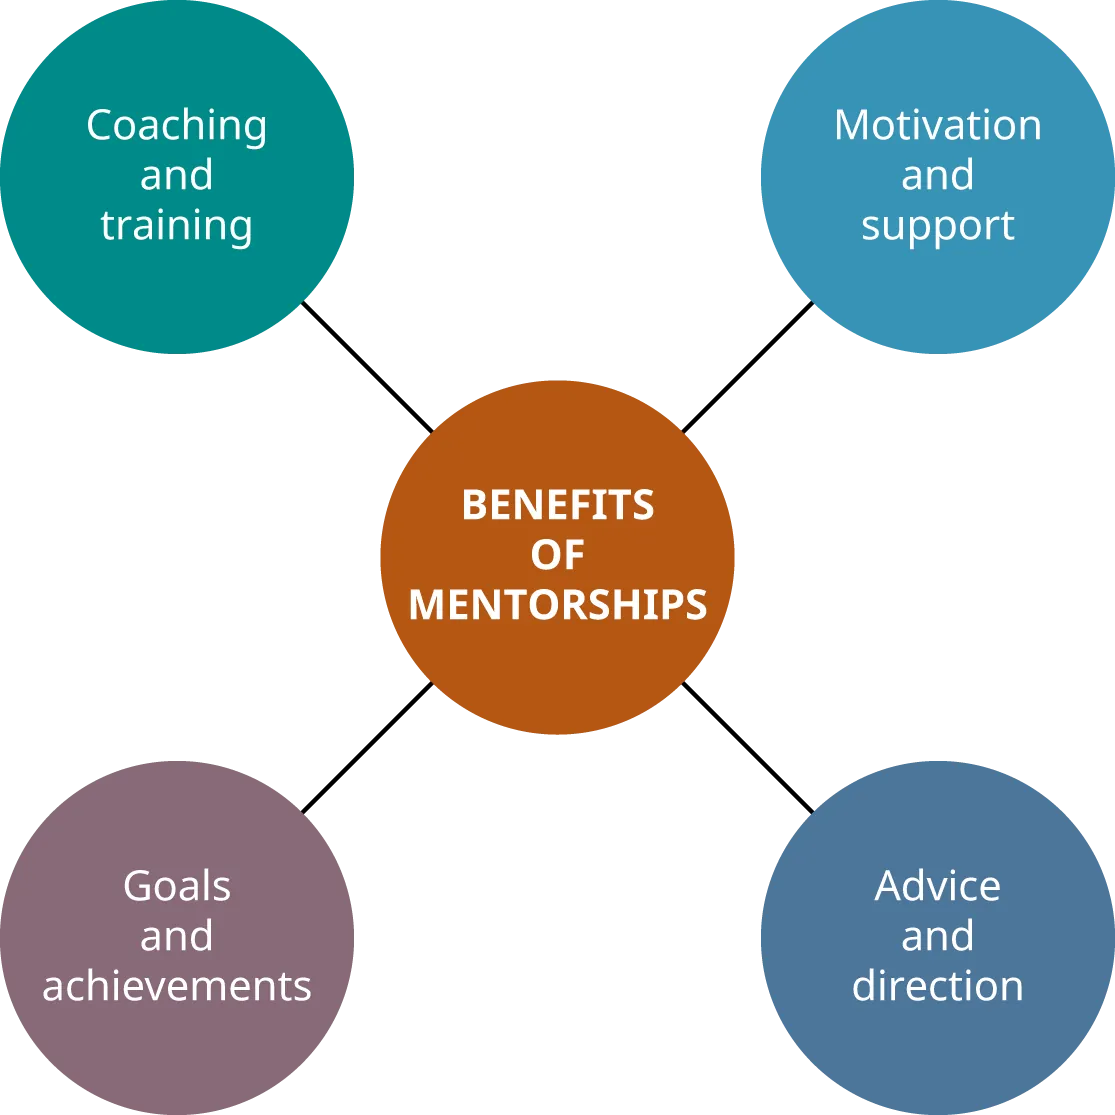 Benefits of Mentorships include coaching and training, motivation and support, goals and achievements, and advice and direction.